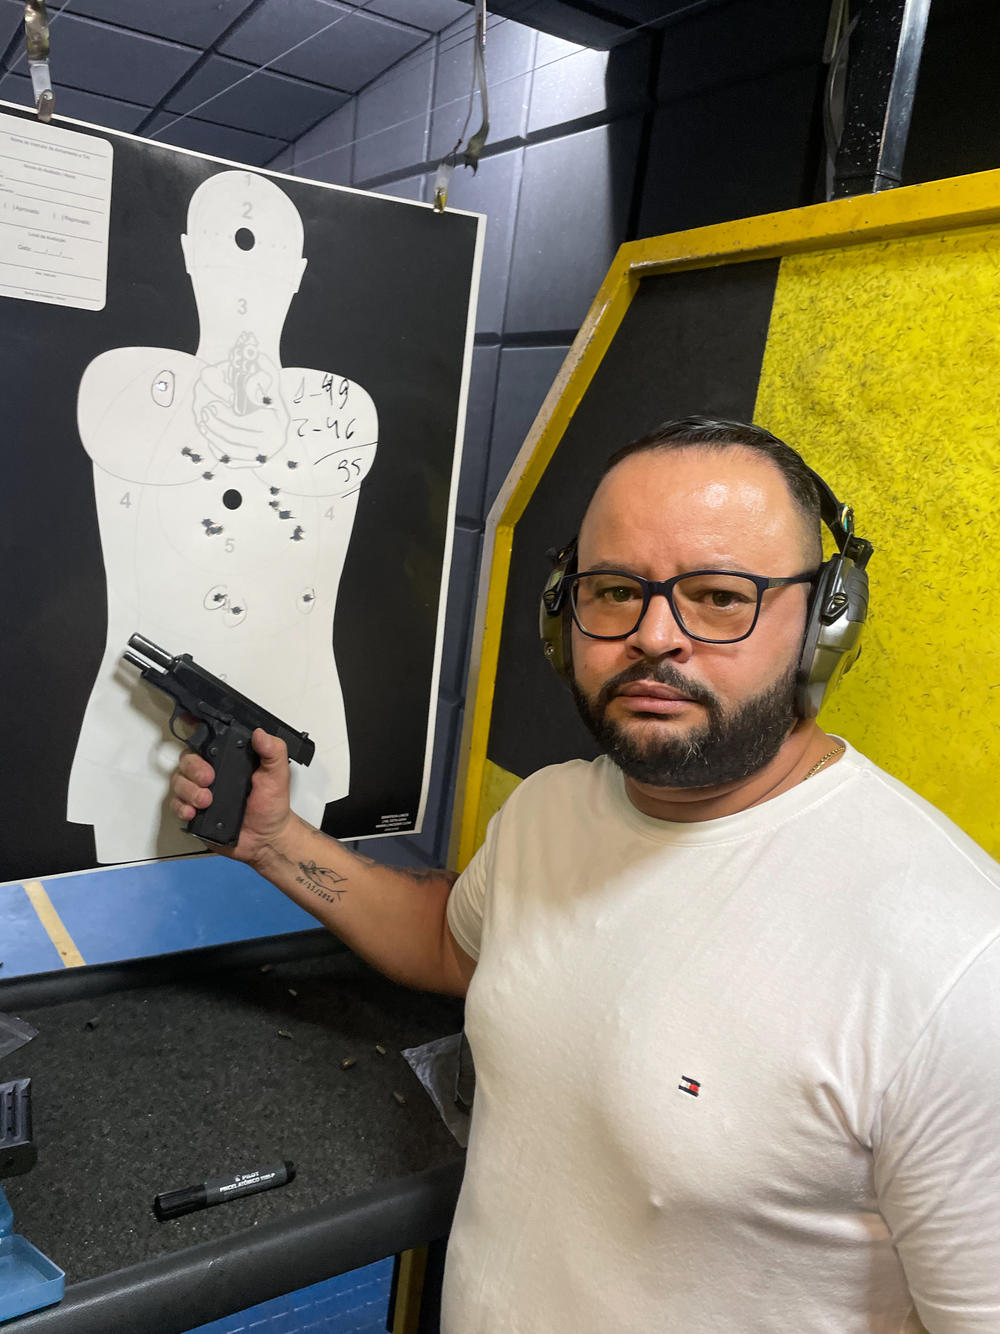 Wagner Carneiro at shooting range in Rio Bonito, Brazil, on July 16.